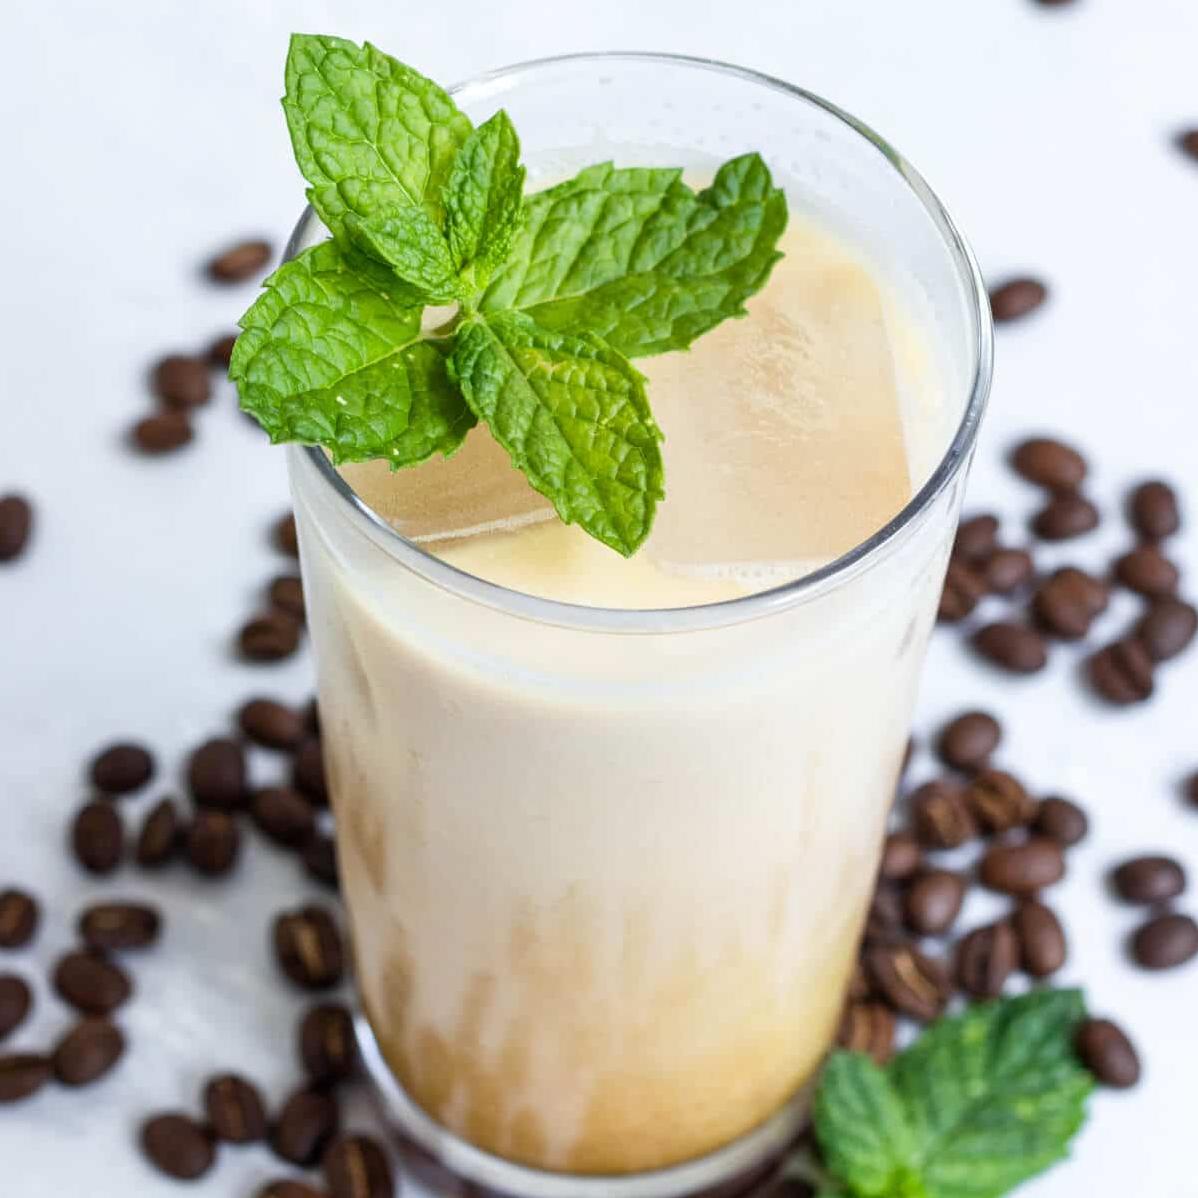  These summer vibes call for a glass of Iced Mint Coffee.